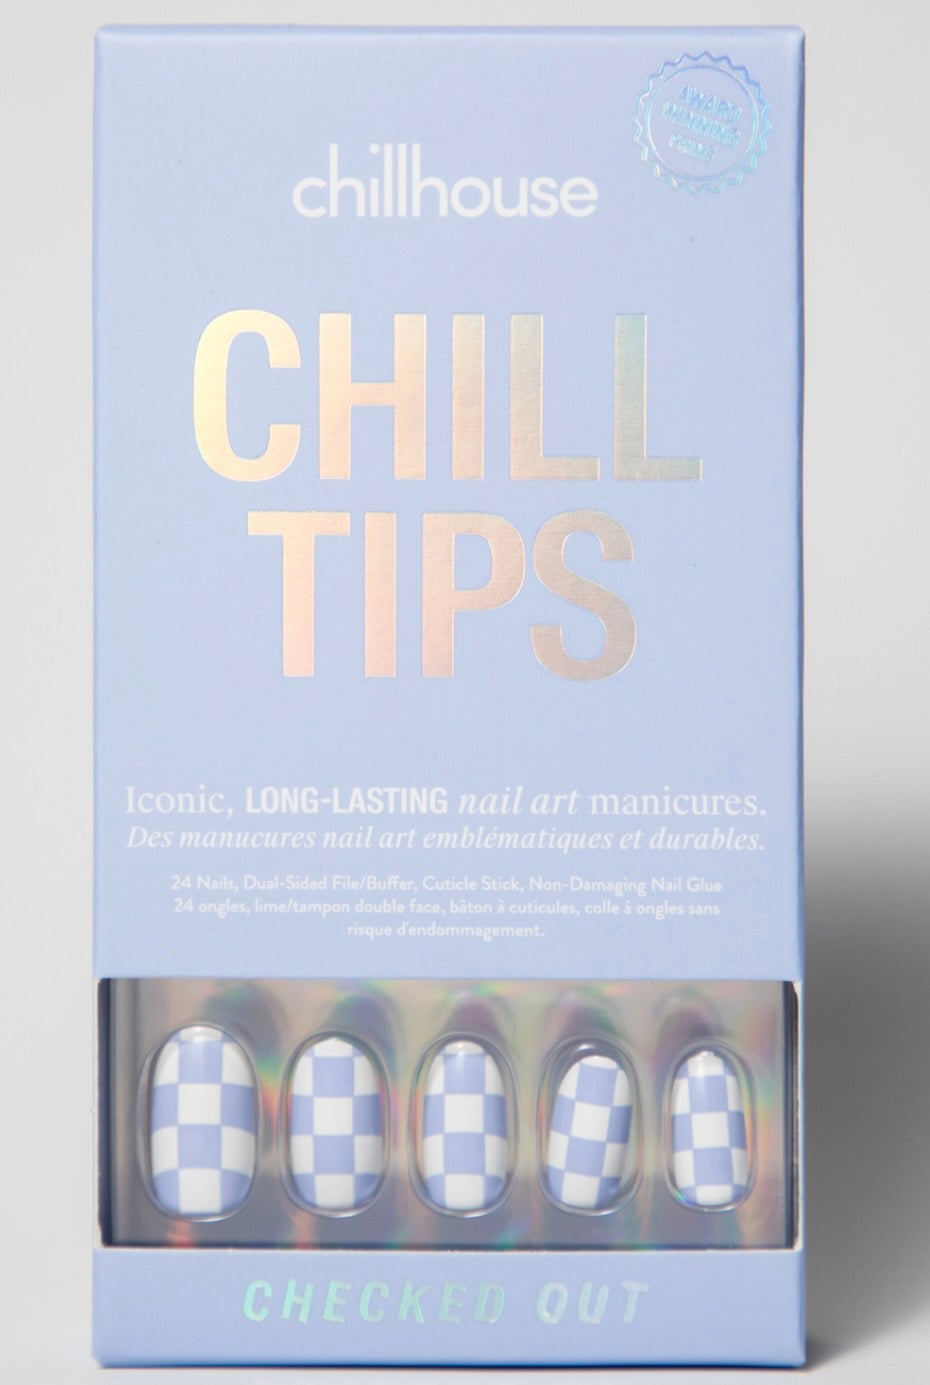 CHECKED OUT CHILL TIPS